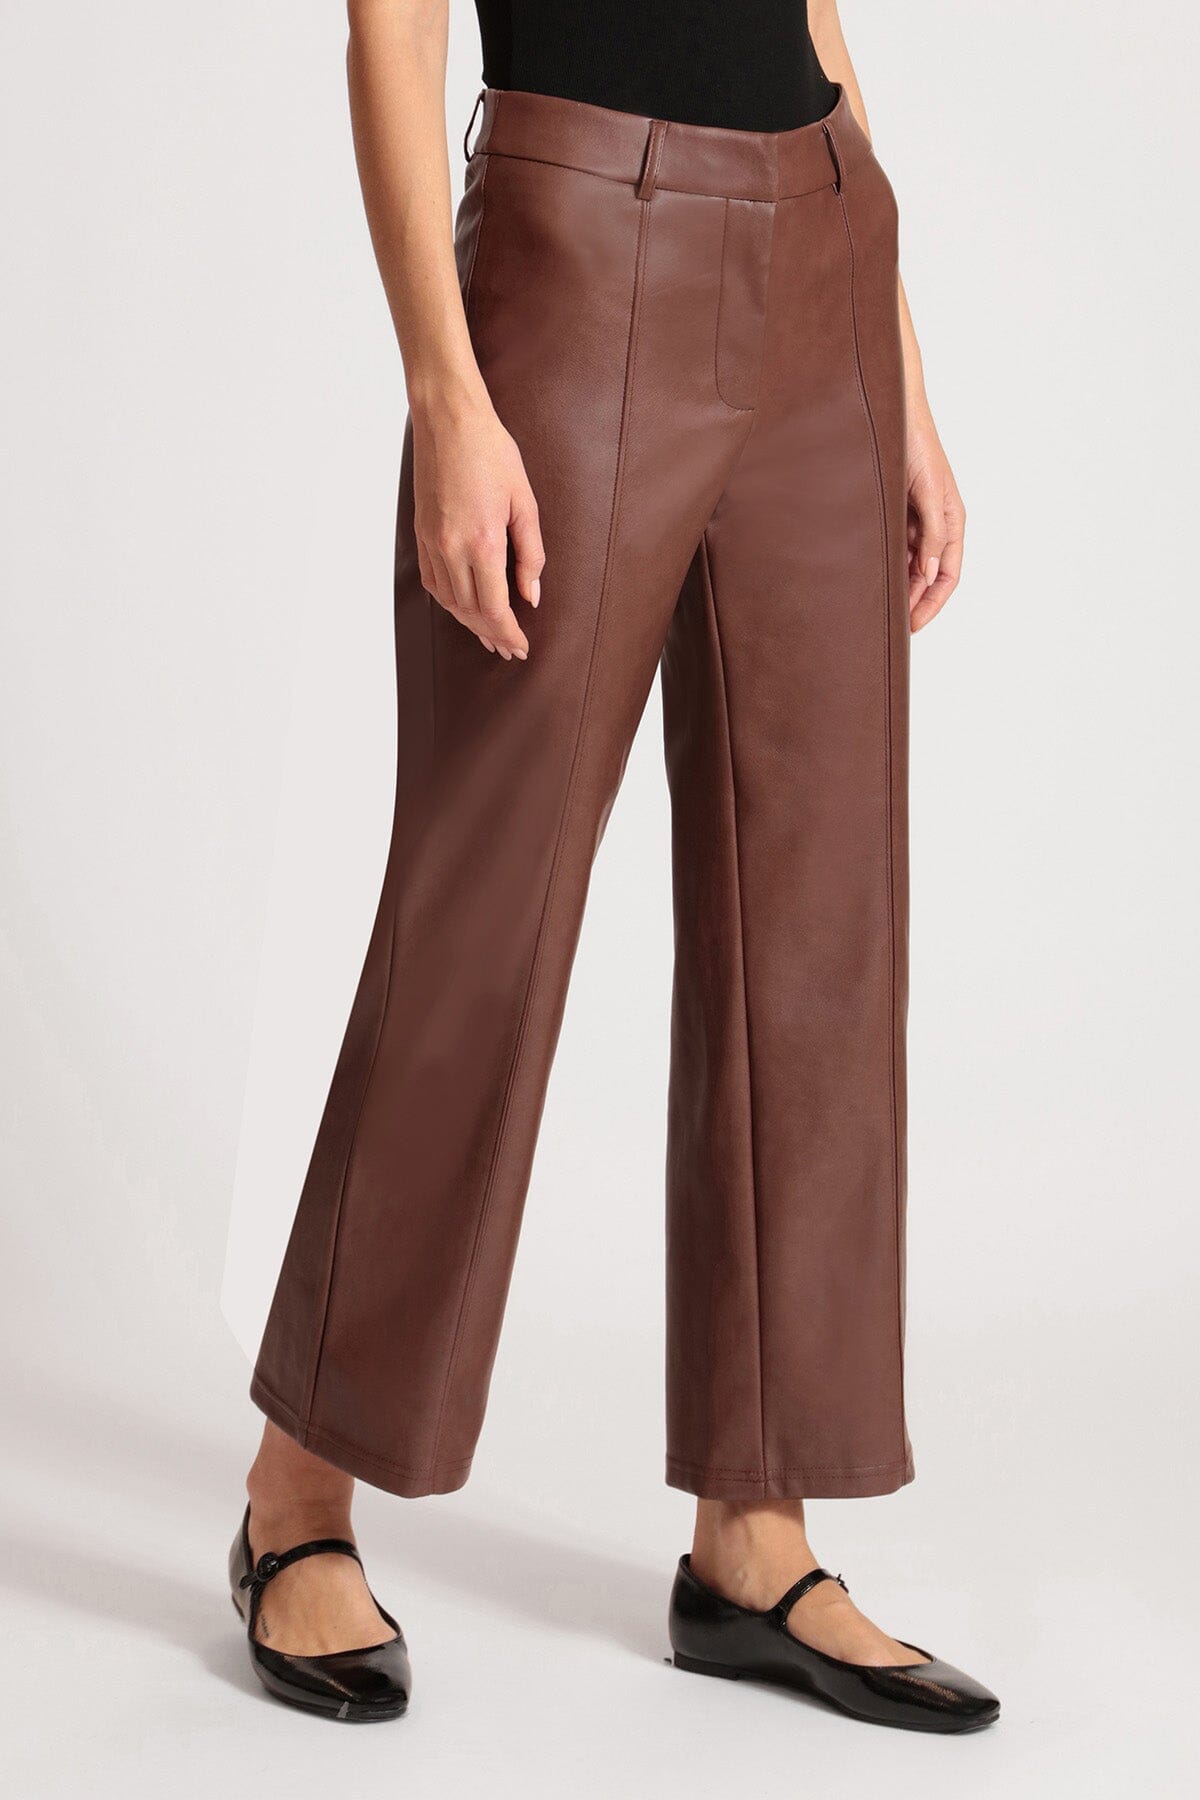 Crop leather pants | the barn 808